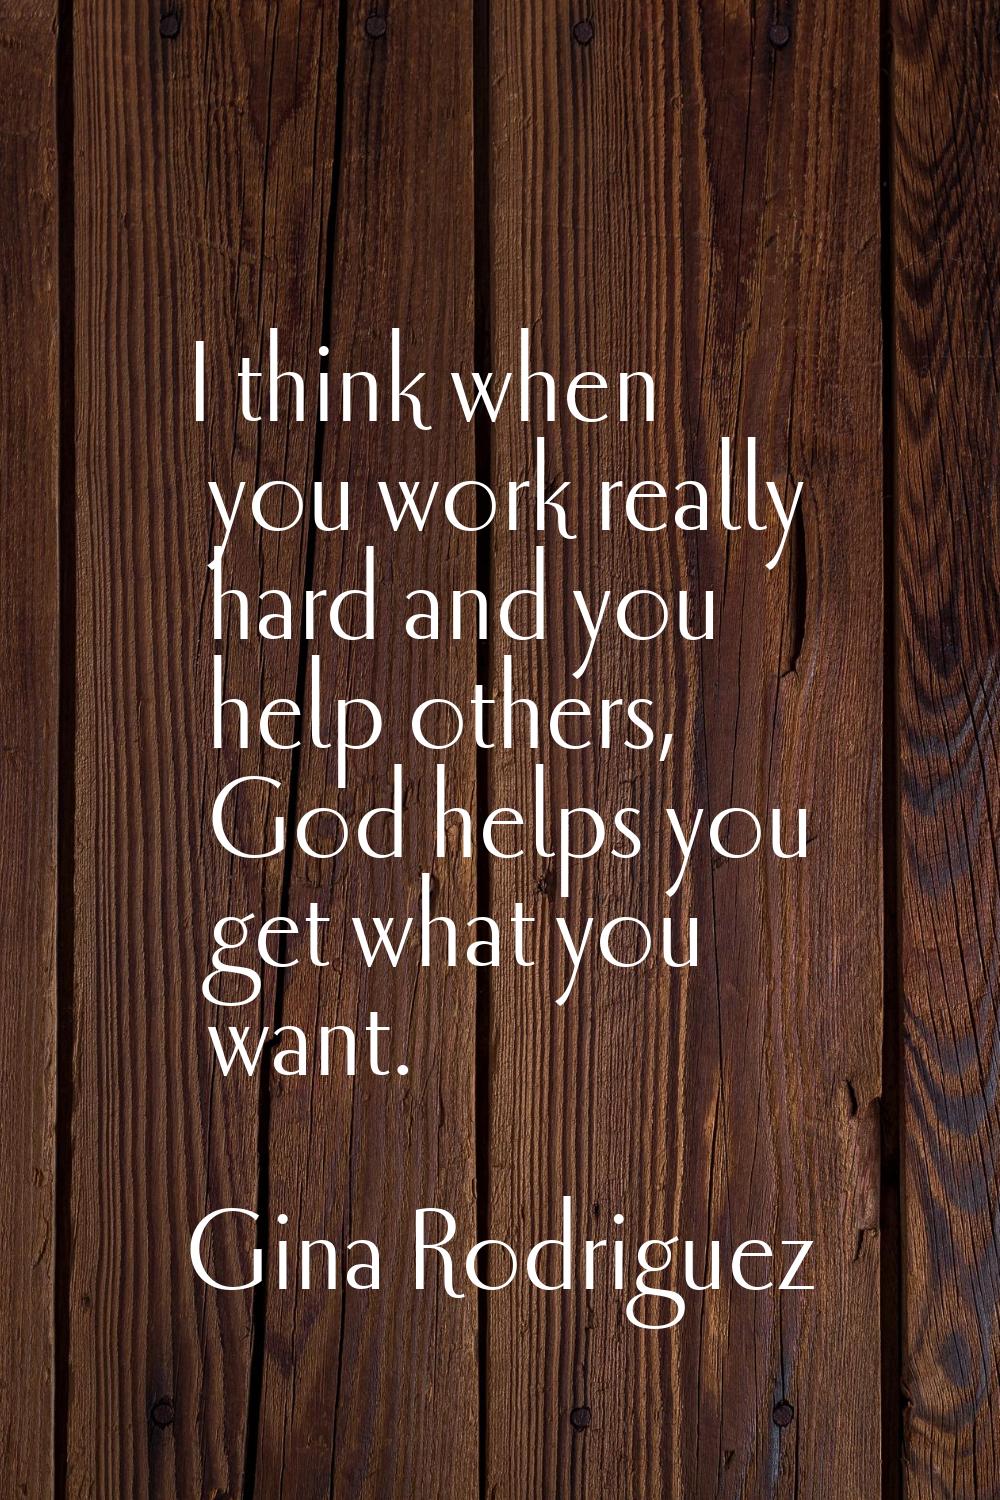 I think when you work really hard and you help others, God helps you get what you want.